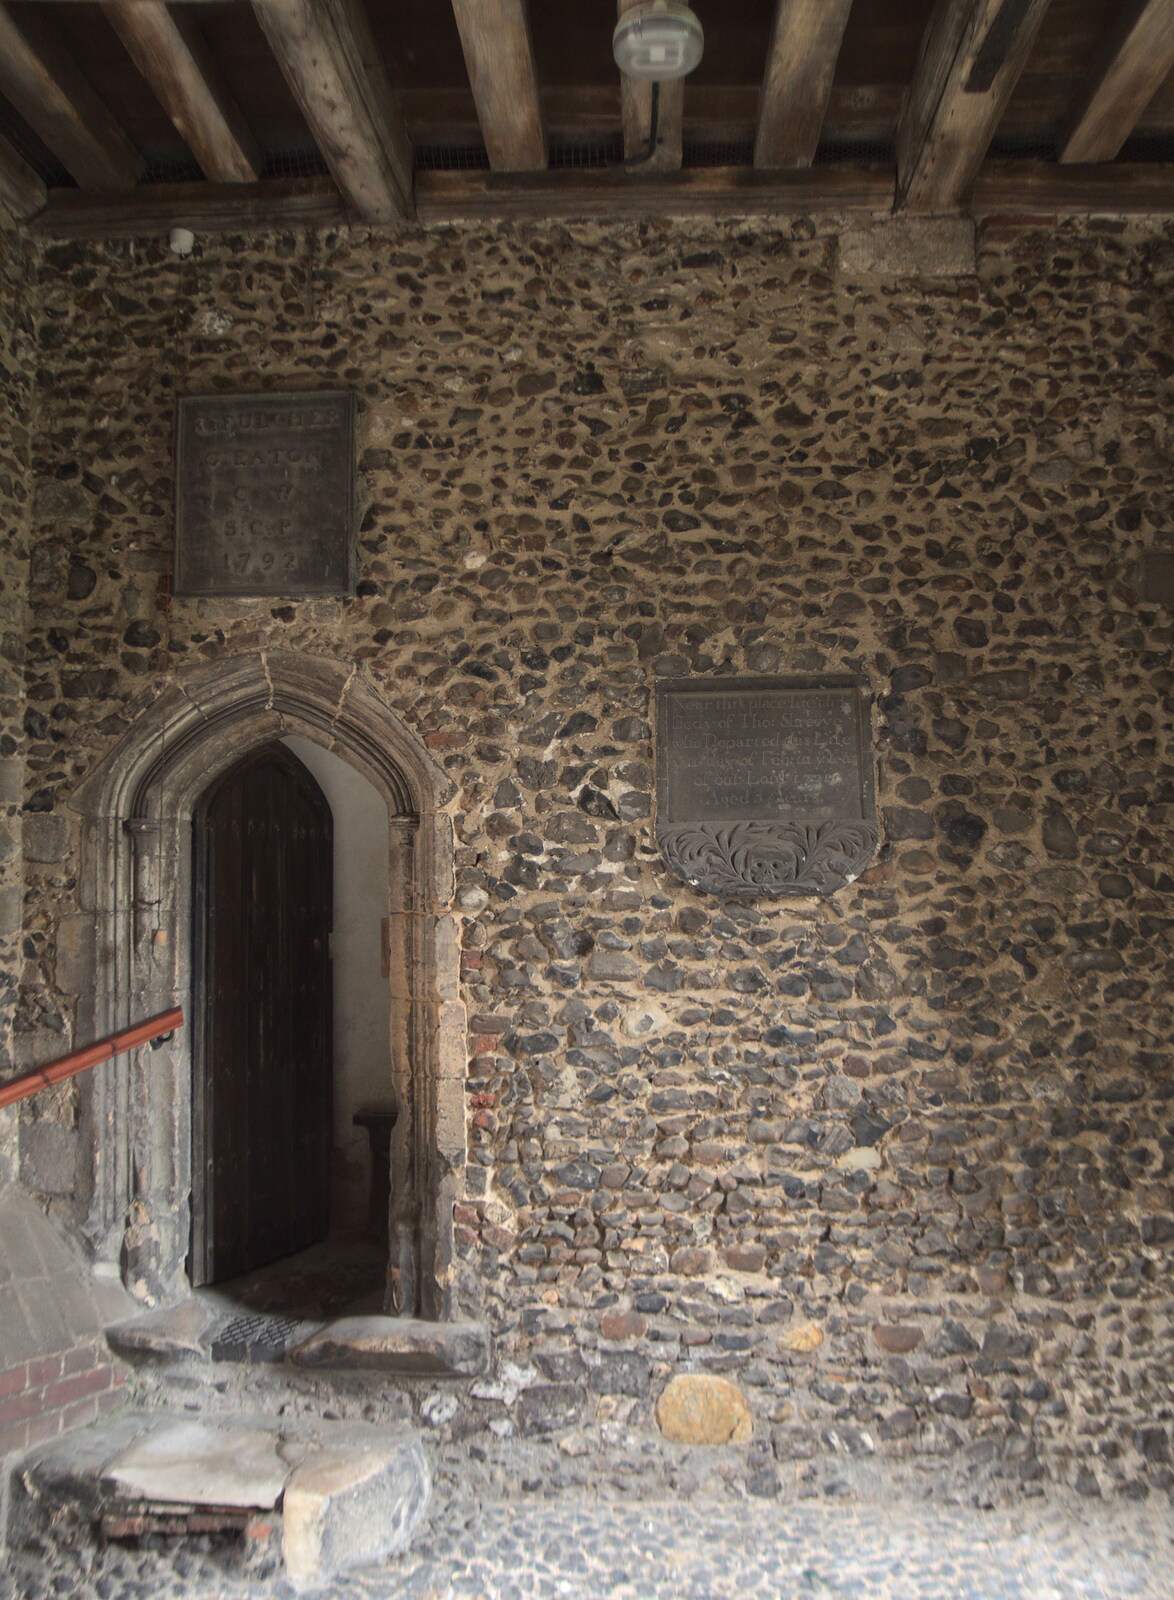 A Bike Ride Miscellany, Brome to Cotton, Suffolk - 6th June 2022: The bell tower door at St. Mary's in Diss is open